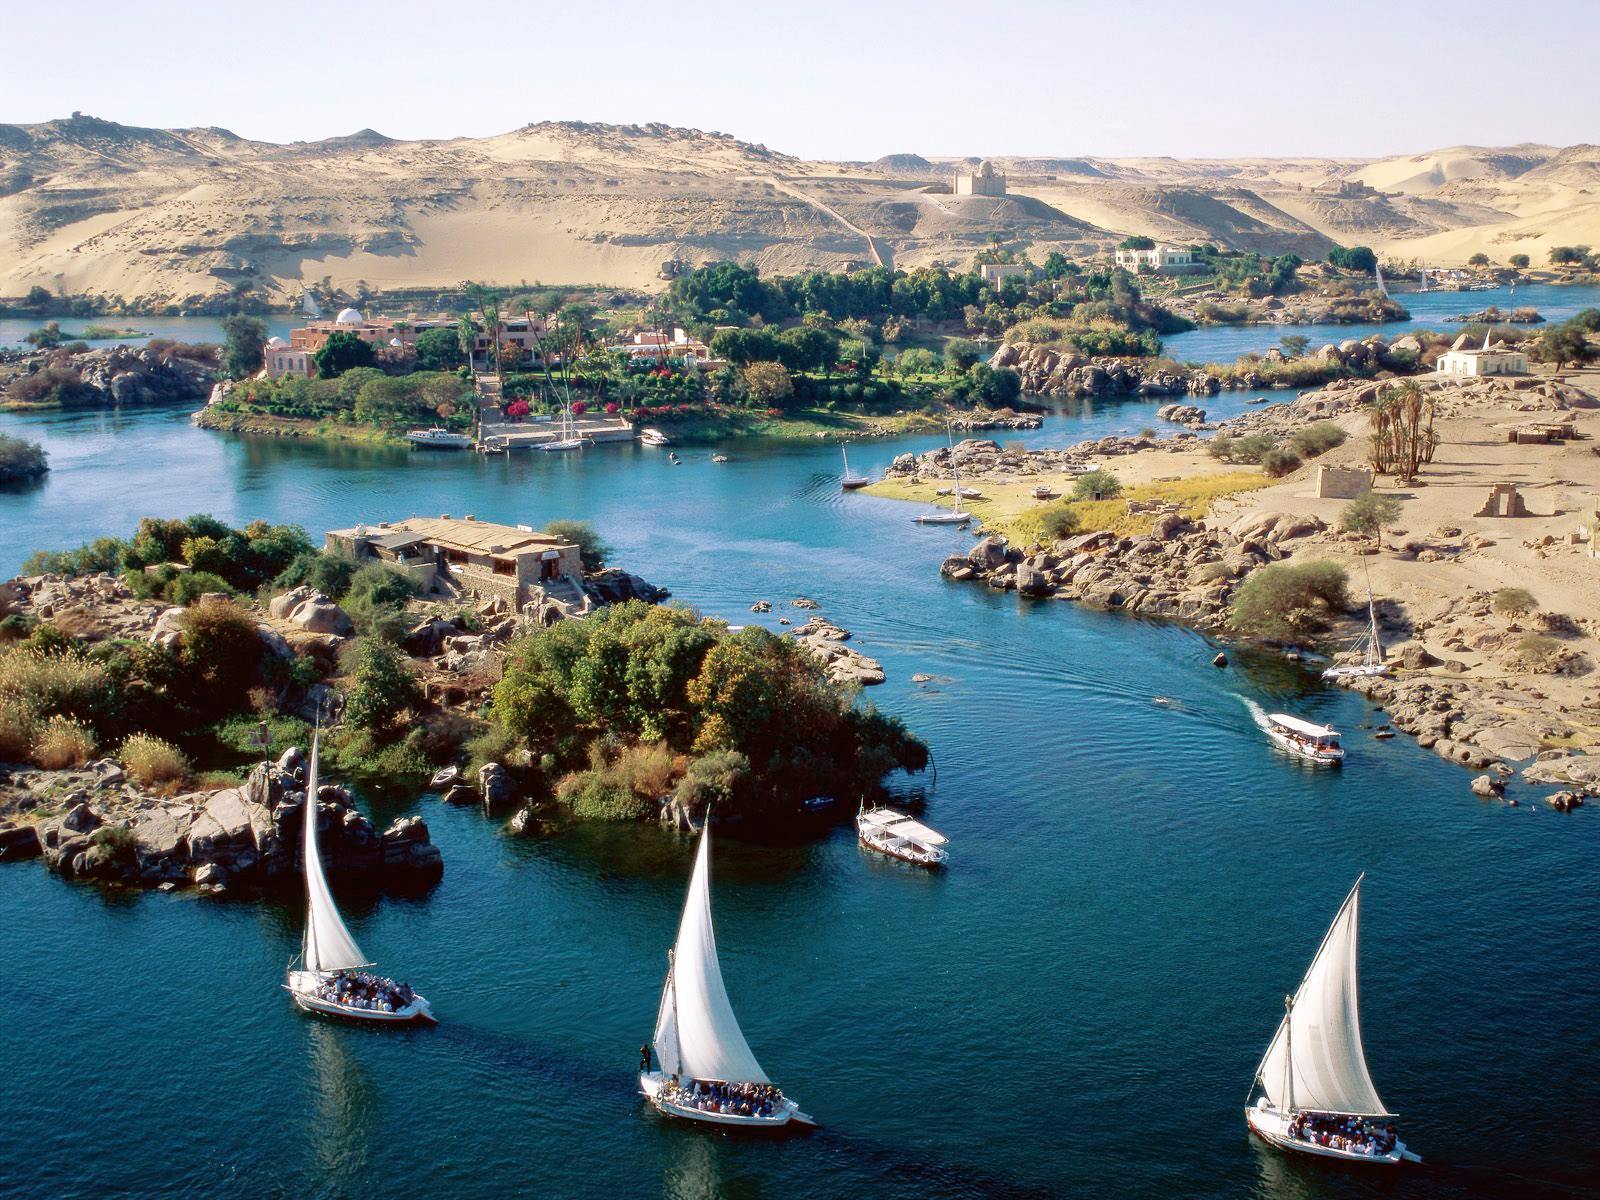 Tour of Aswan with felucca experience